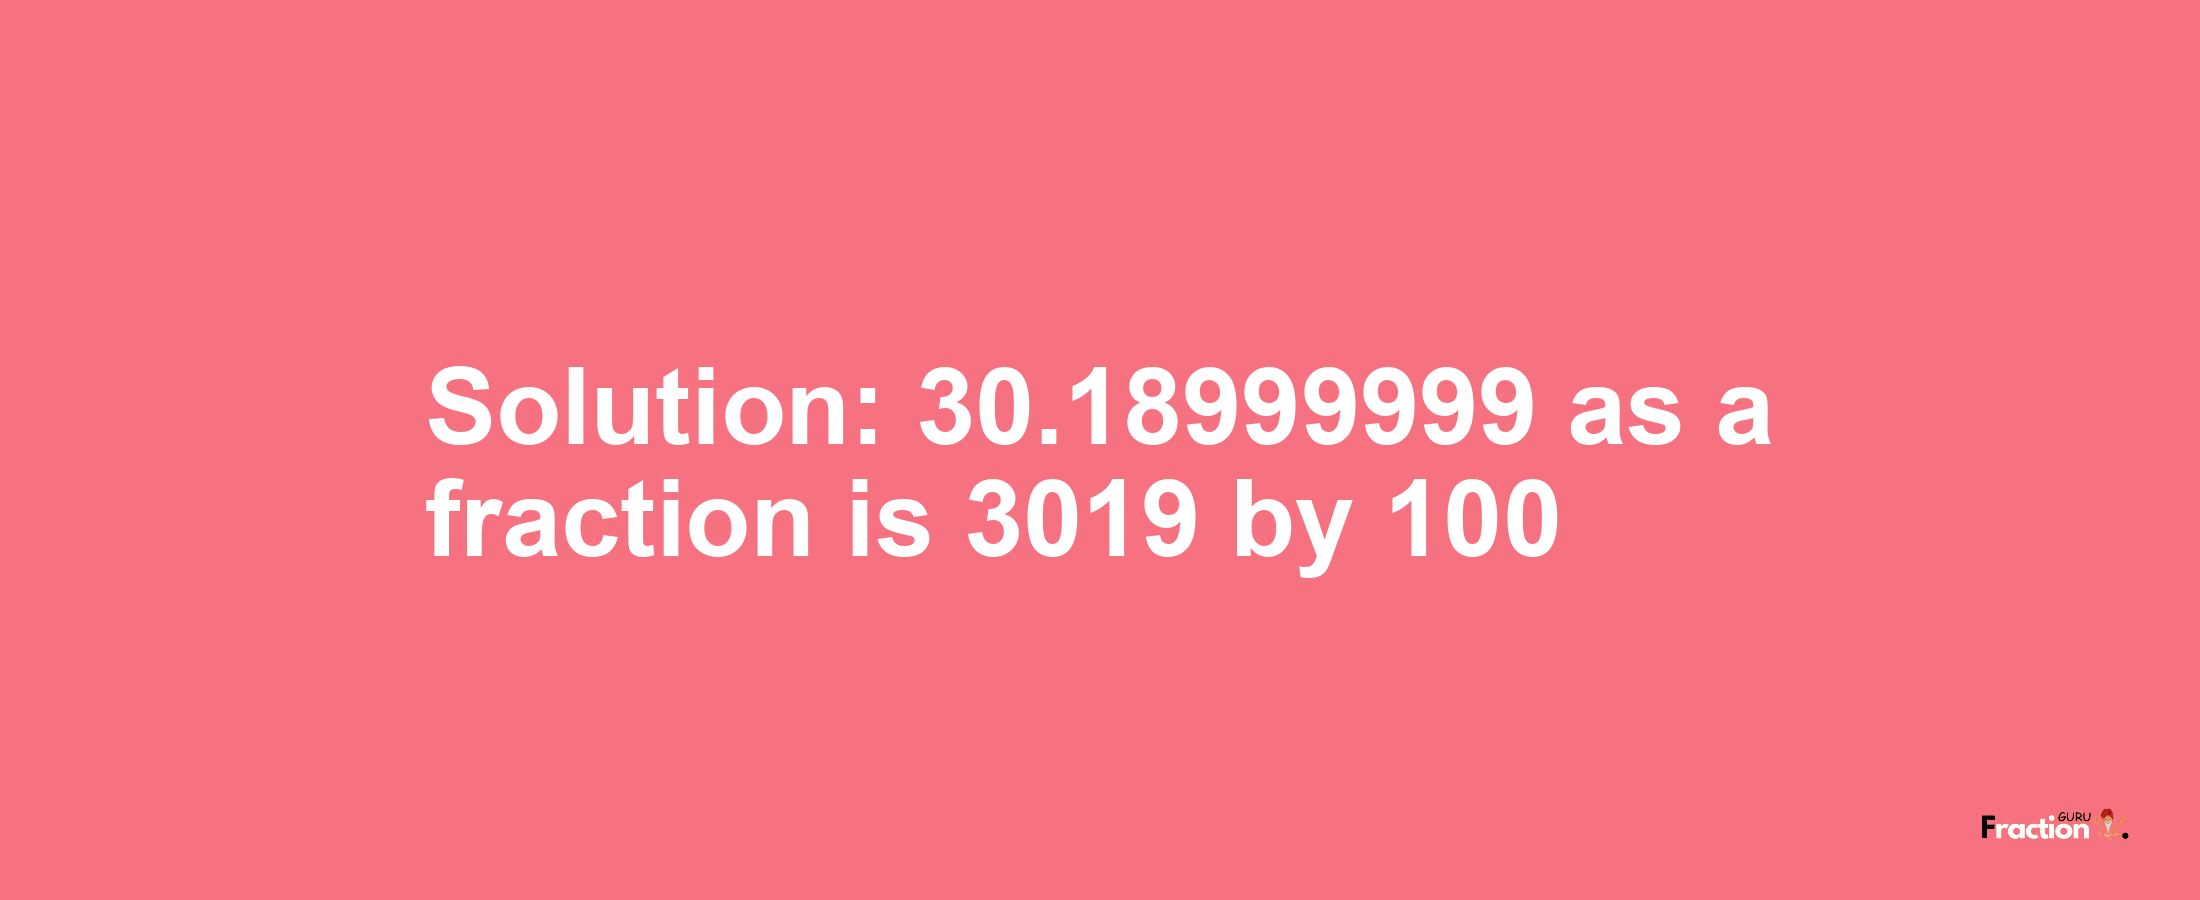 Solution:30.18999999 as a fraction is 3019/100